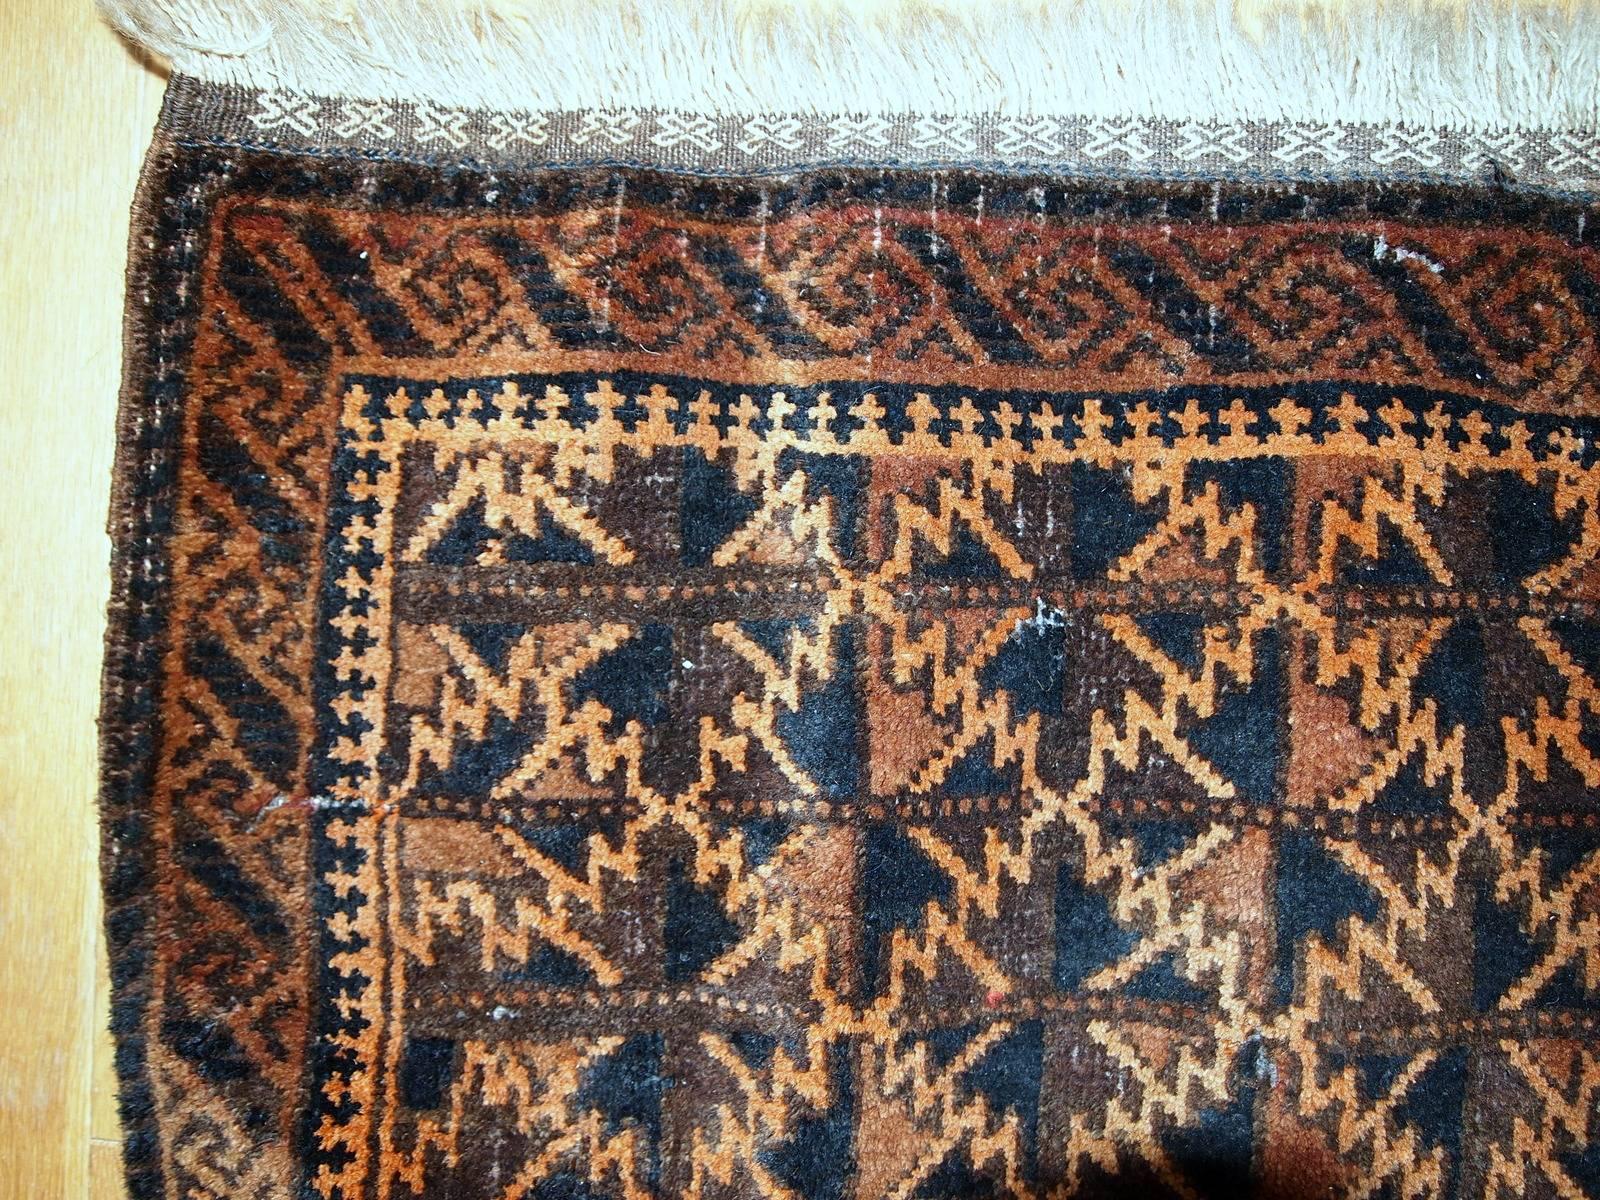 Antique handmade Afghan Baluch bag face. The rug has geometric repeating pattern in the diamond shapes. The main colors on this rug are orange, different shades of brown. Beautiful artistic border surrounding the rug. The rug is in original